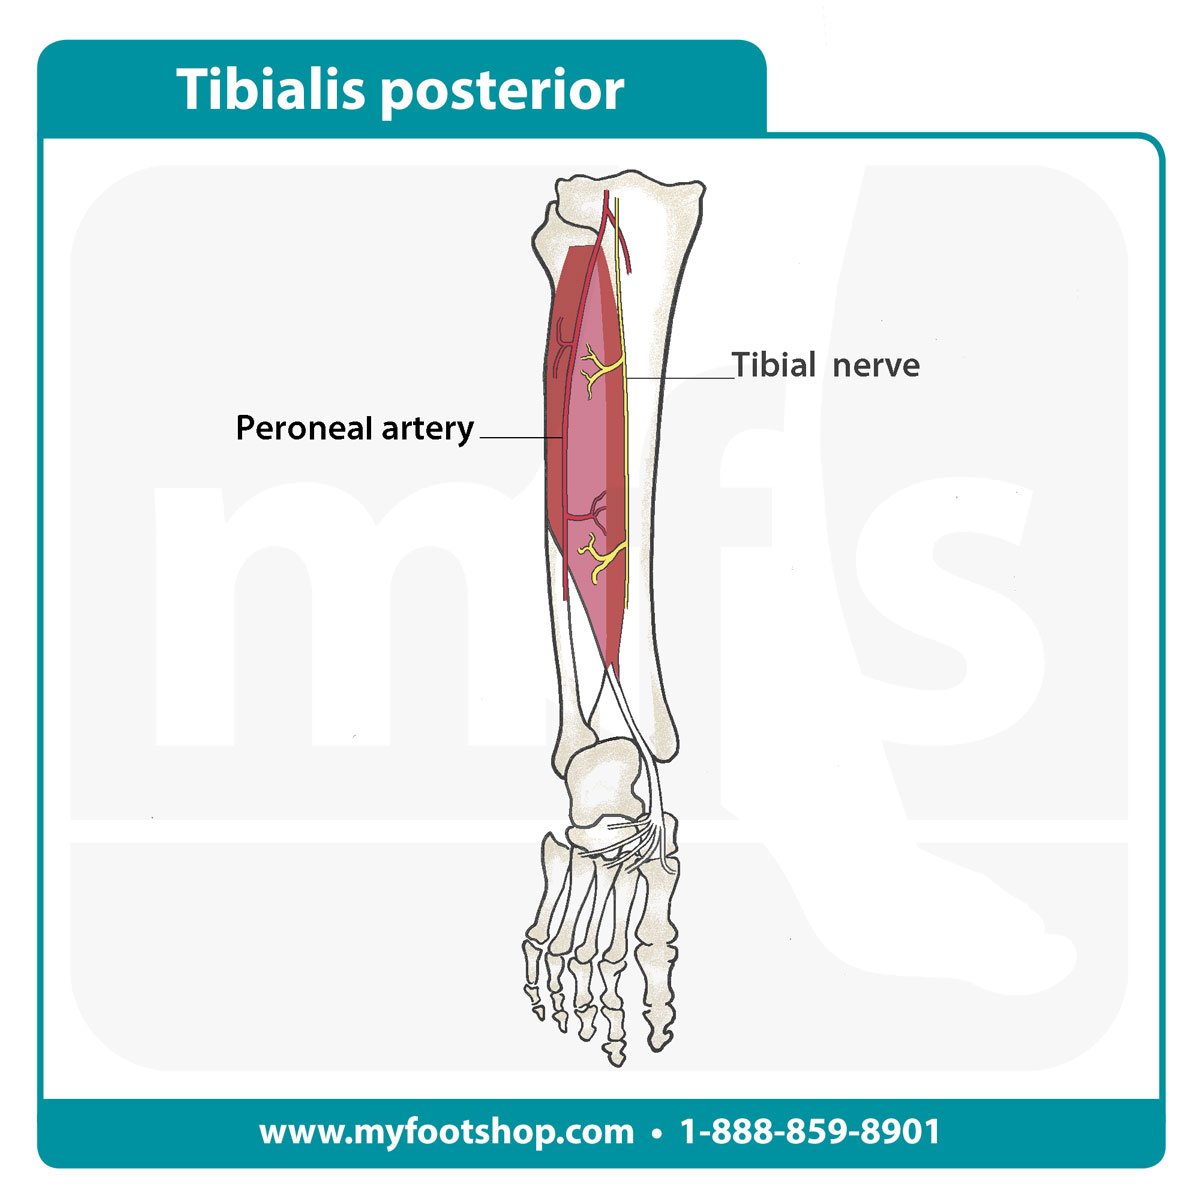 tibialis posterior muscle and tendon